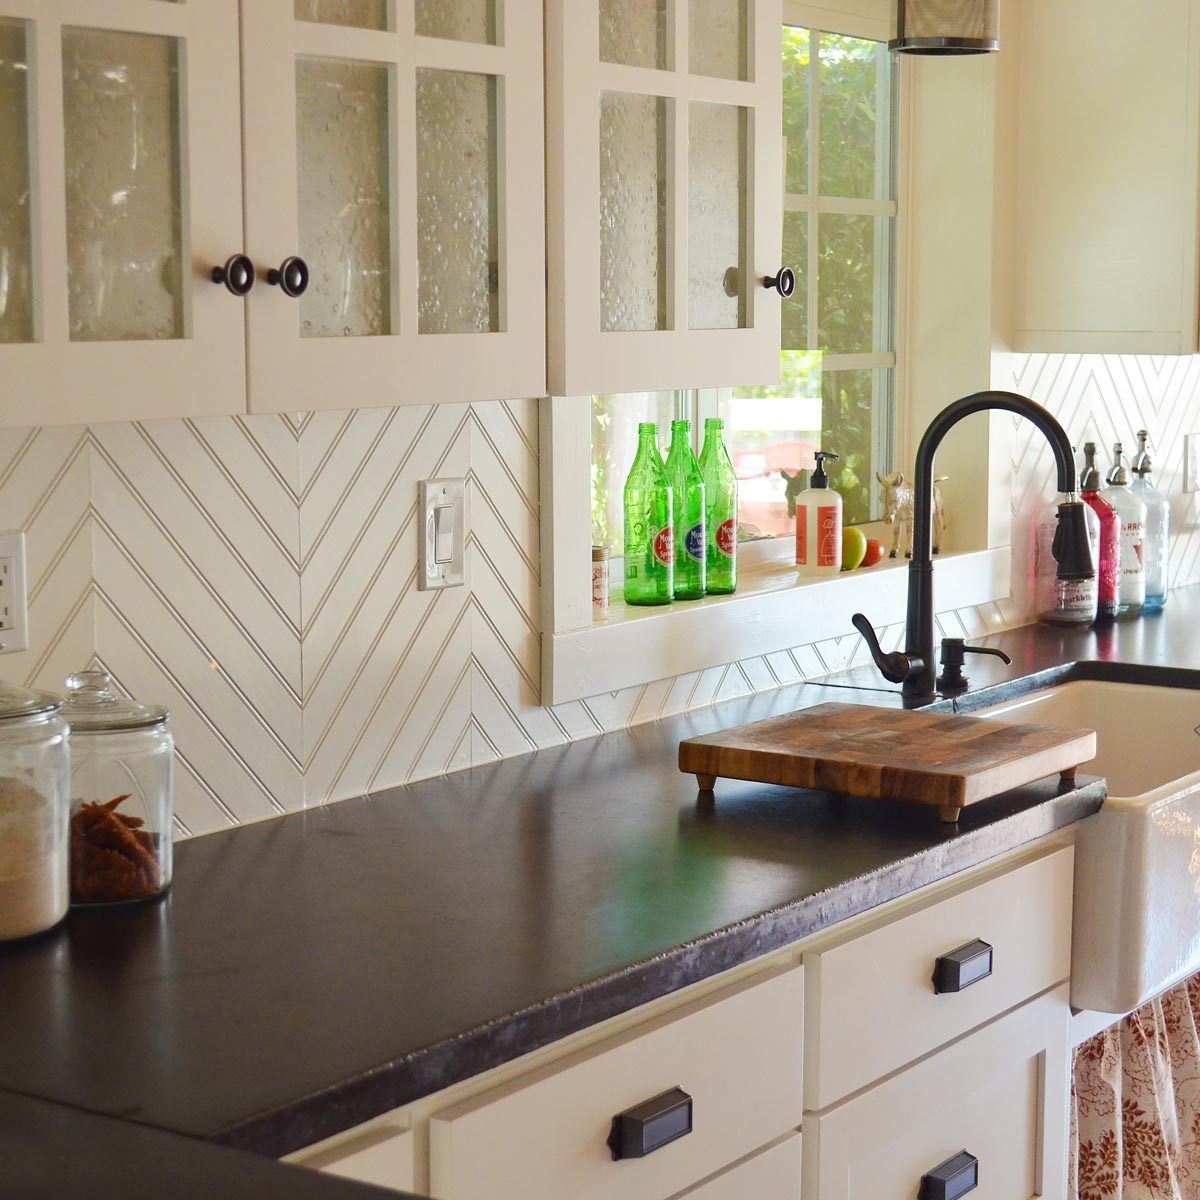 Update the Look of Your Kitchen with a New Backsplash